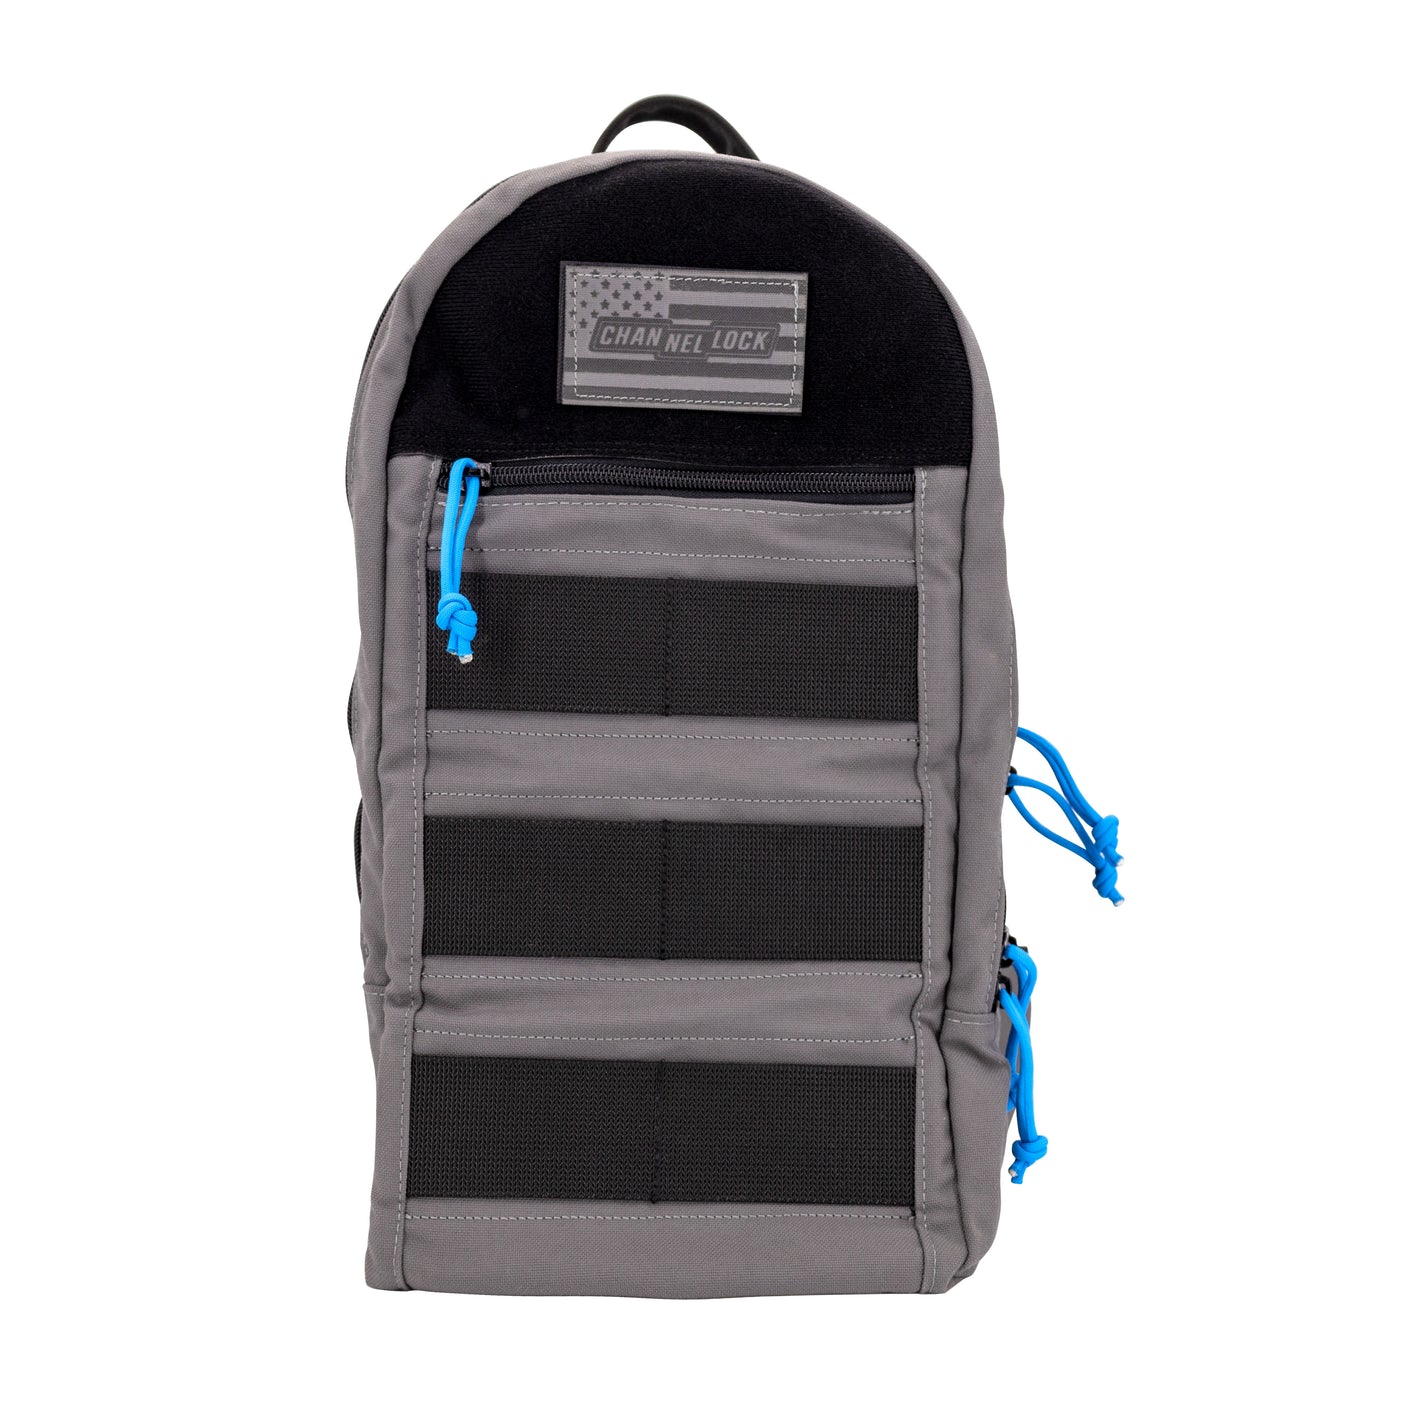 TBP2G CHANNELLOCK® PRO Double-Compartment Tool Backpack w/ Modular AIM